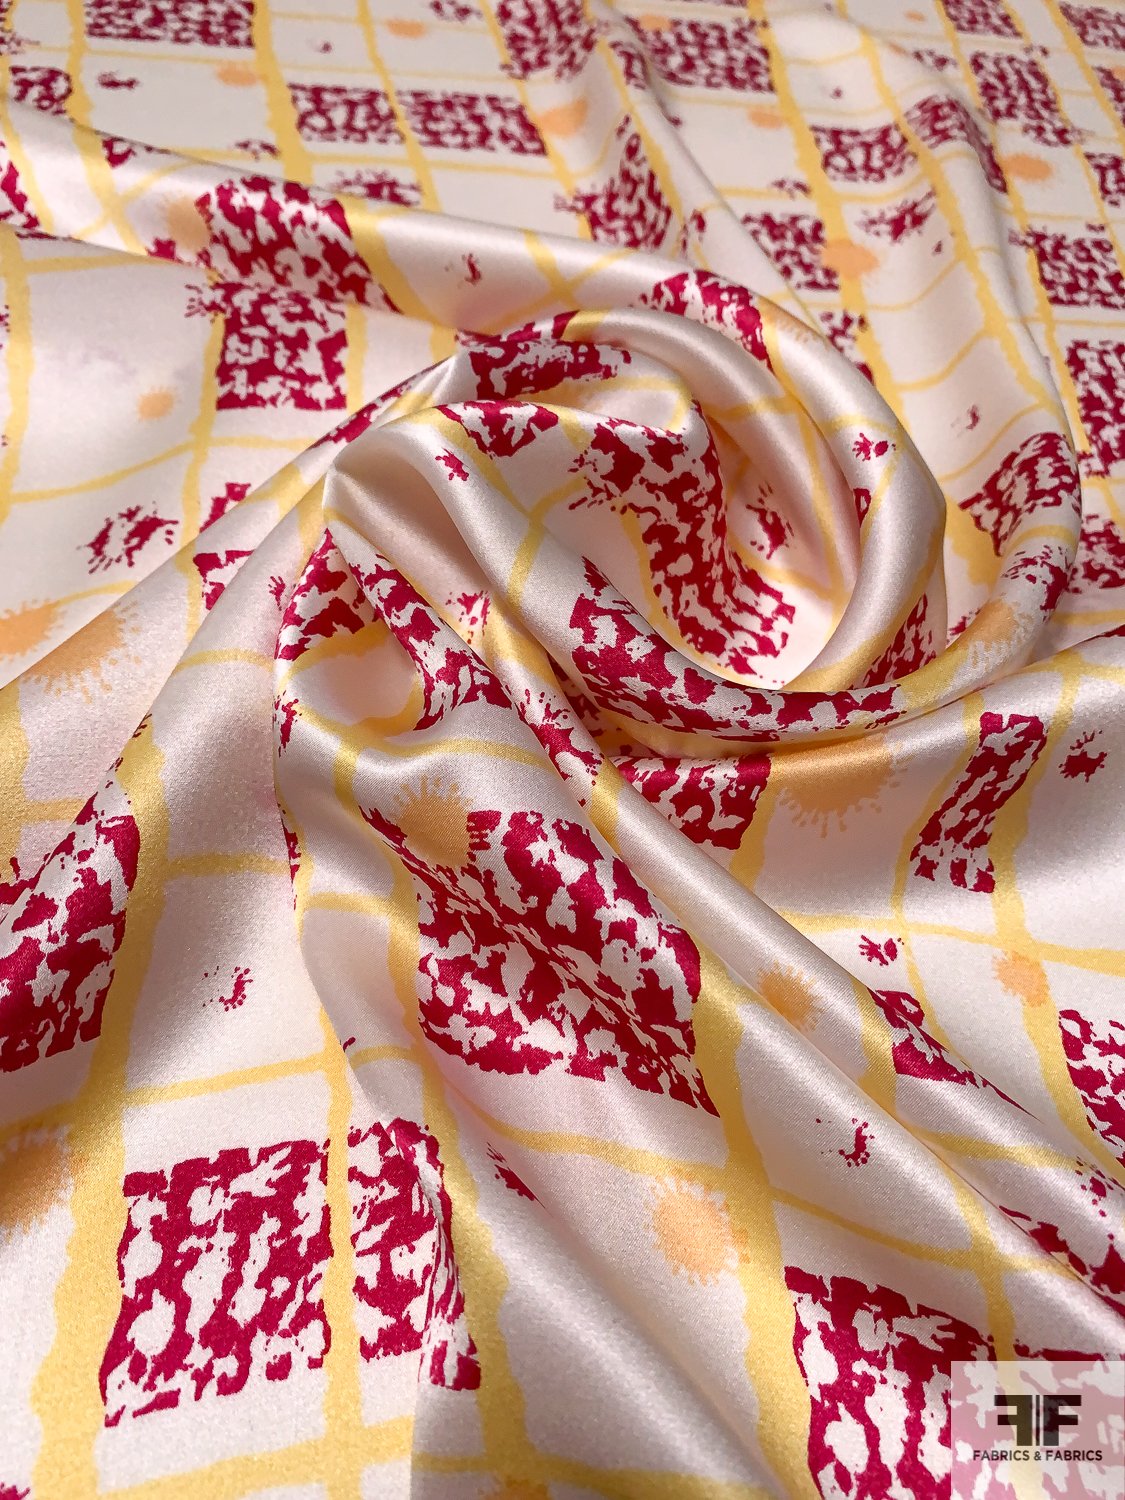 Abstract Linear and Geometric Printed Silk Charmeuse - Deep Magenta / Butter Yellow / Off-White